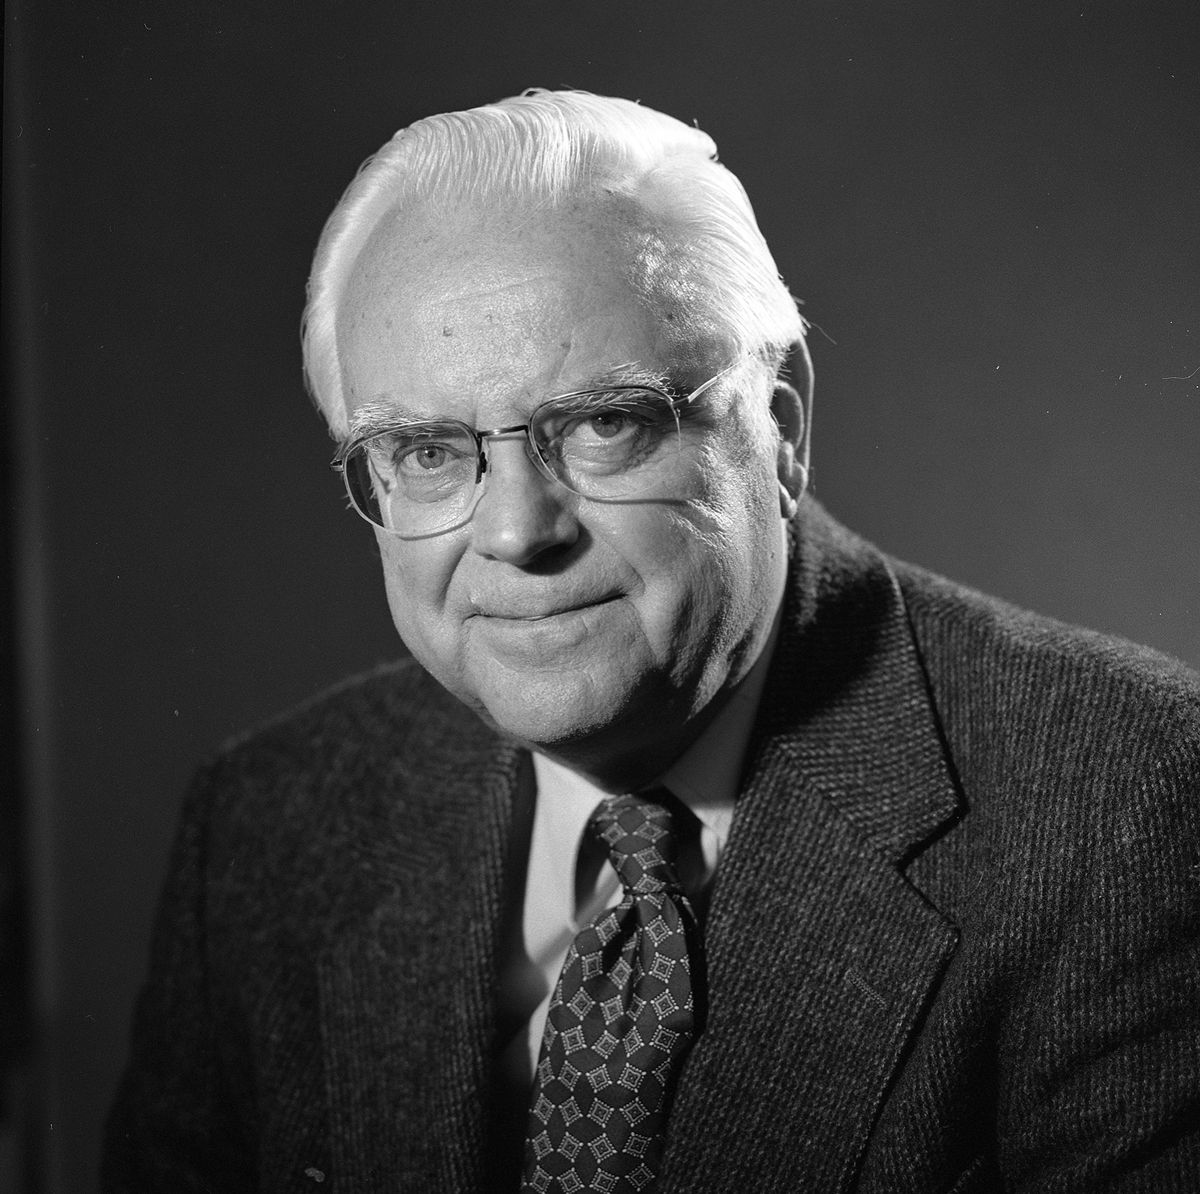 Black and white portrait of Dr. Frank Drake, wearing a suit and tie, and wearing glasses.